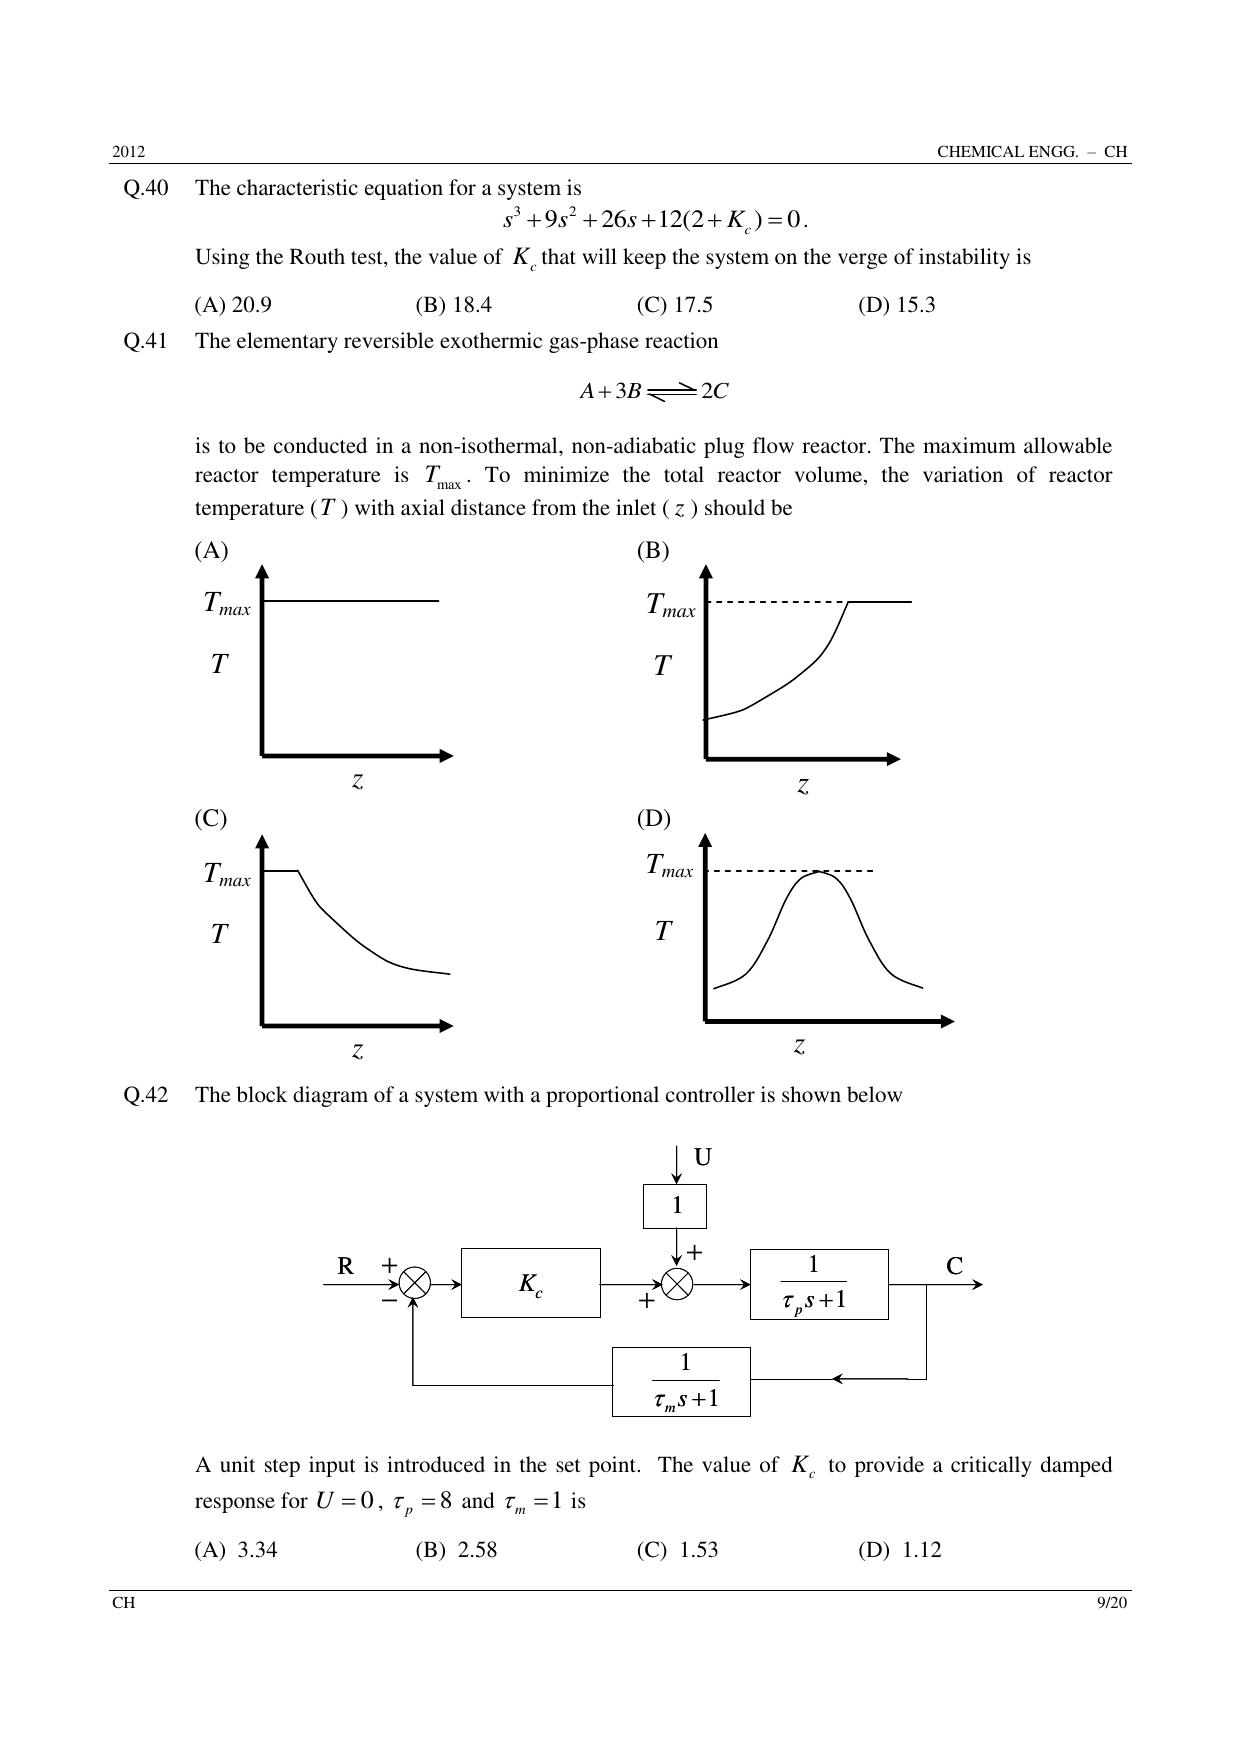 GATE 2012 Chemical Engineering (CH) Question Paper with Answer Key - Page 9